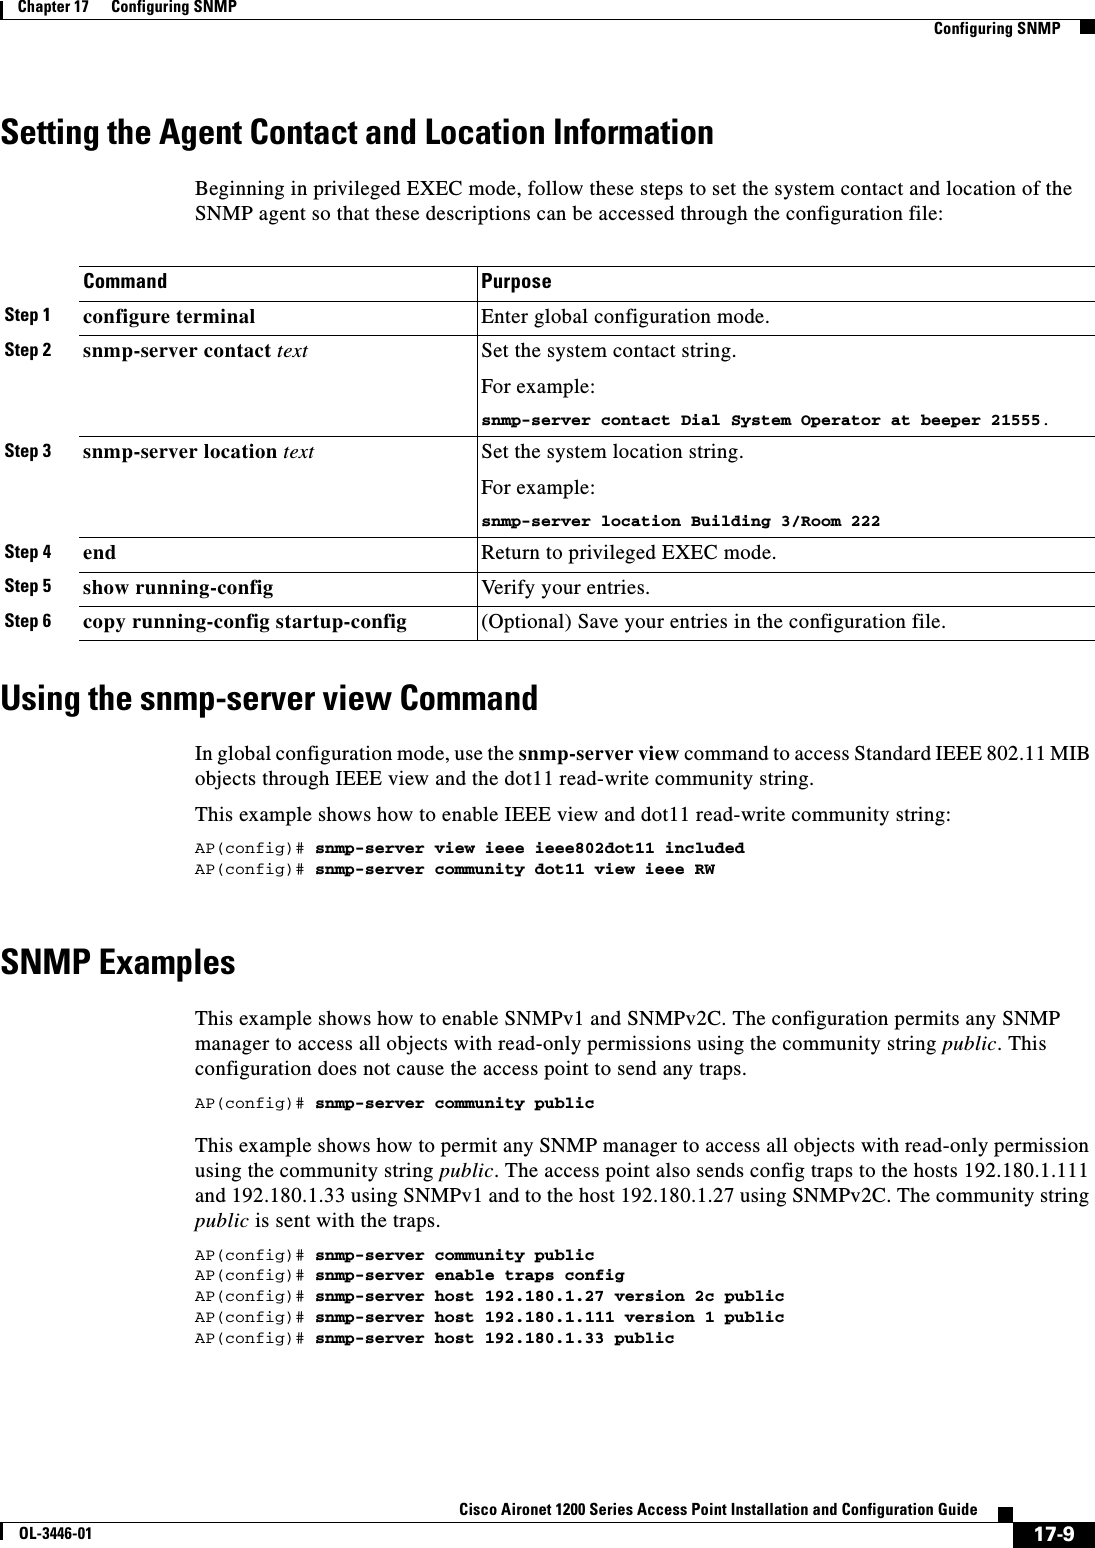 17-9Cisco Aironet 1200 Series Access Point Installation and Configuration GuideOL-3446-01Chapter 17      Configuring SNMPConfiguring SNMPSetting the Agent Contact and Location InformationBeginning in privileged EXEC mode, follow these steps to set the system contact and location of the SNMP agent so that these descriptions can be accessed through the configuration file:Using the snmp-server view CommandIn global configuration mode, use the snmp-server view command to access Standard IEEE 802.11 MIB objects through IEEE view and the dot11 read-write community string. This example shows how to enable IEEE view and dot11 read-write community string:AP(config)# snmp-server view ieee ieee802dot11 includedAP(config)# snmp-server community dot11 view ieee RWSNMP ExamplesThis example shows how to enable SNMPv1 and SNMPv2C. The configuration permits any SNMP manager to access all objects with read-only permissions using the community string public. This configuration does not cause the access point to send any traps.AP(config)# snmp-server community publicThis example shows how to permit any SNMP manager to access all objects with read-only permission using the community string public. The access point also sends config traps to the hosts 192.180.1.111 and 192.180.1.33 using SNMPv1 and to the host 192.180.1.27 using SNMPv2C. The community string public is sent with the traps.AP(config)# snmp-server community publicAP(config)# snmp-server enable traps configAP(config)# snmp-server host 192.180.1.27 version 2c publicAP(config)# snmp-server host 192.180.1.111 version 1 publicAP(config)# snmp-server host 192.180.1.33 publicCommand PurposeStep 1 configure terminal Enter global configuration mode.Step 2 snmp-server contact text Set the system contact string.For example:snmp-server contact Dial System Operator at beeper 21555.Step 3 snmp-server location text Set the system location string.For example:snmp-server location Building 3/Room 222Step 4 end Return to privileged EXEC mode.Step 5 show running-config Verify your entries.Step 6 copy running-config startup-config (Optional) Save your entries in the configuration file.